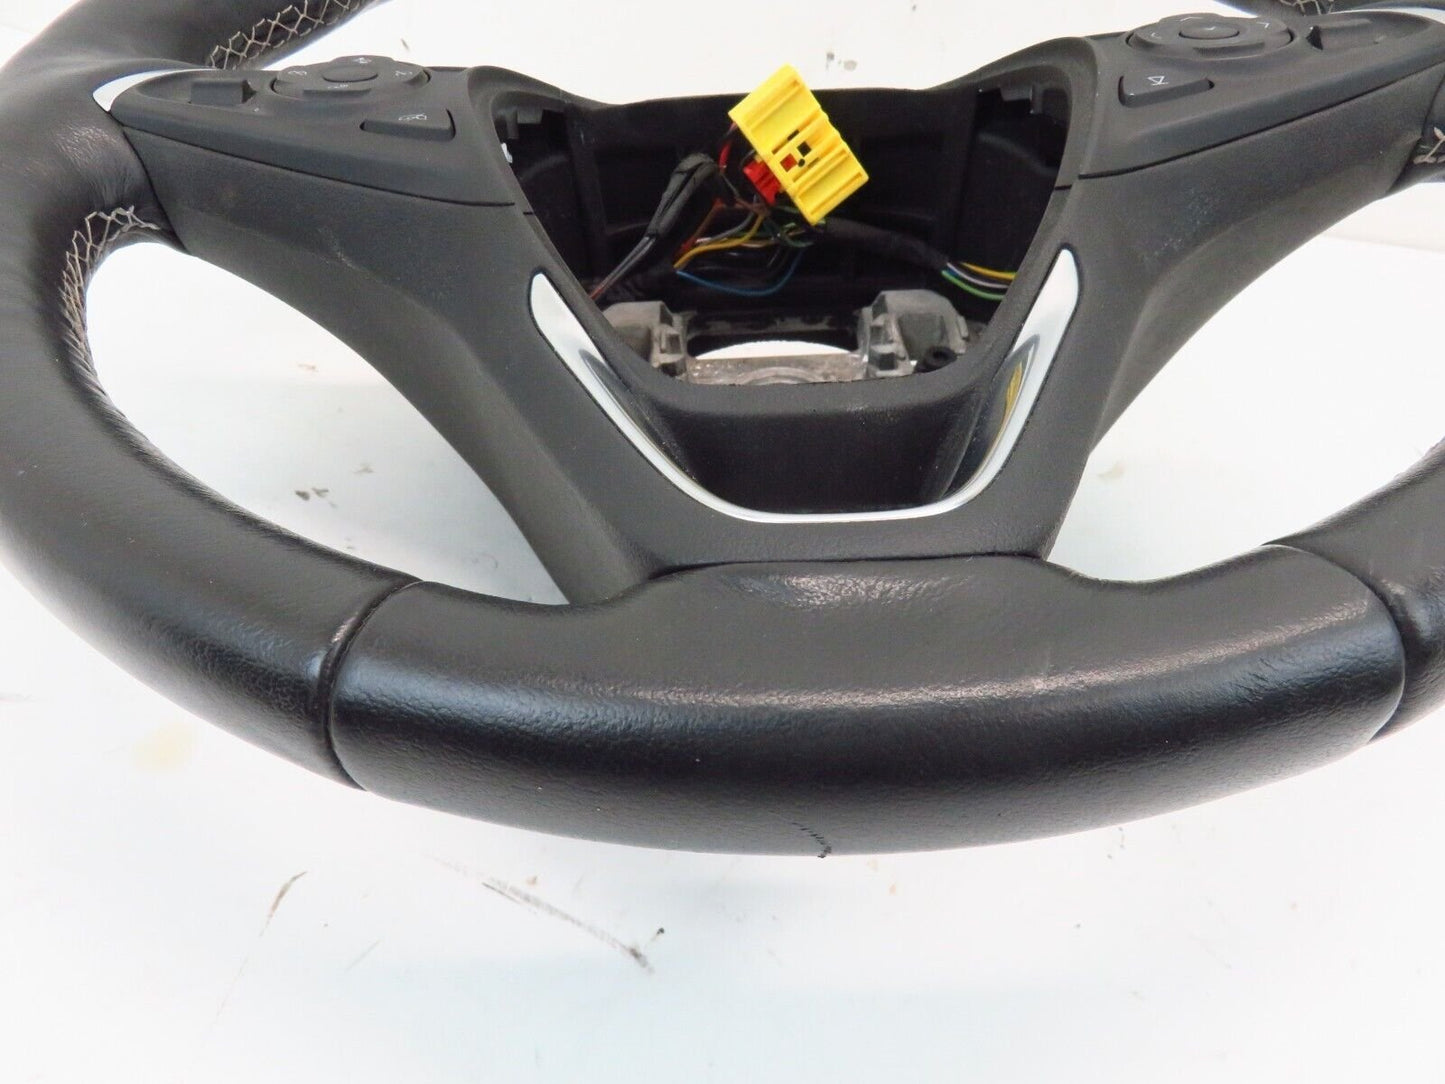 2019 Buick Regal TourX Driver Steering Wheel Leather OEM 19